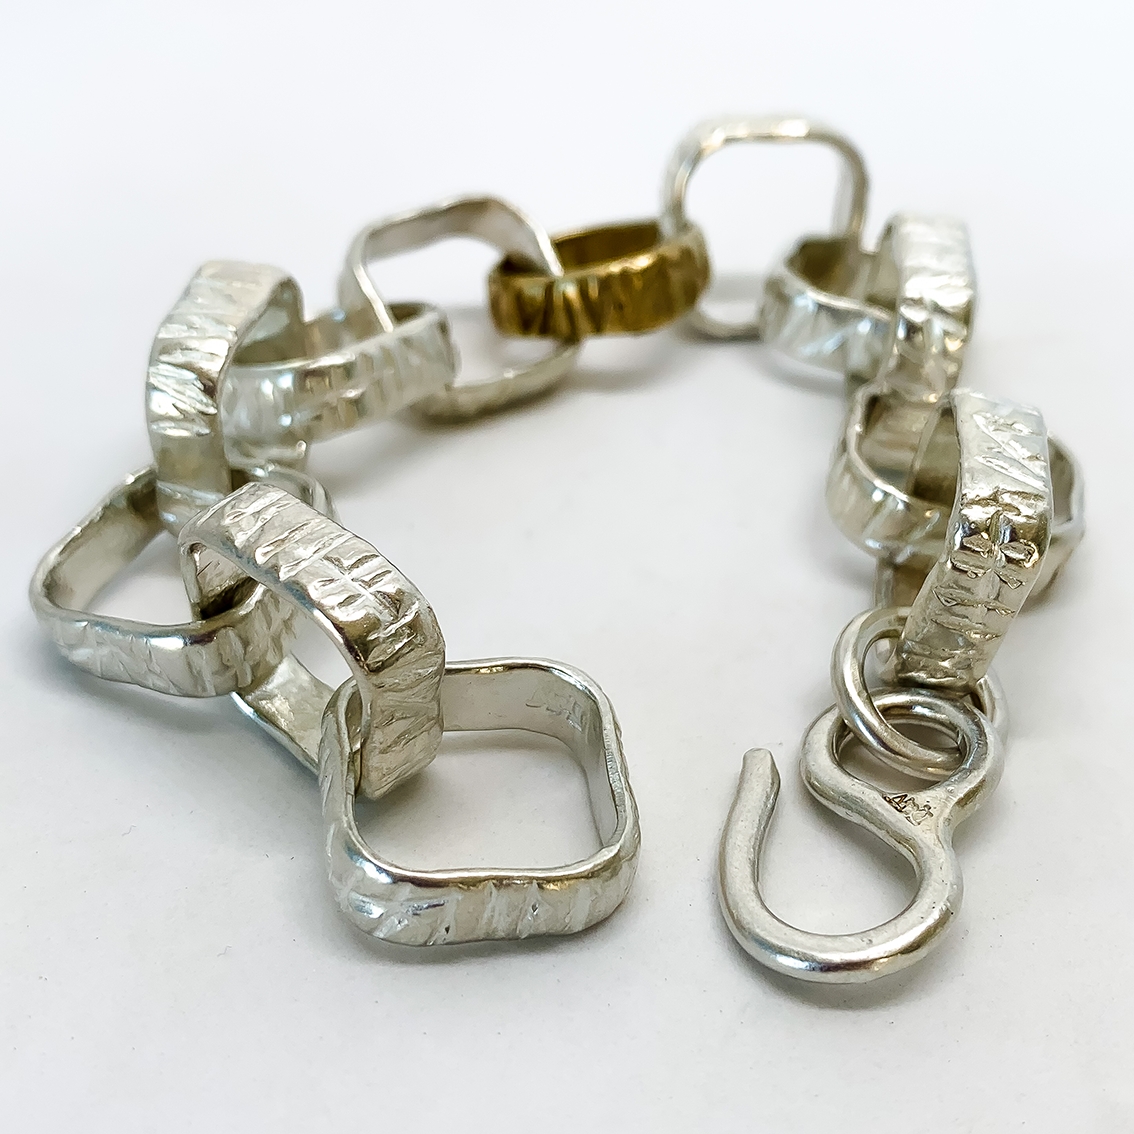 Counting Giants Heavy Square Link Chain Bracelet - Sterling Silver + Bronze